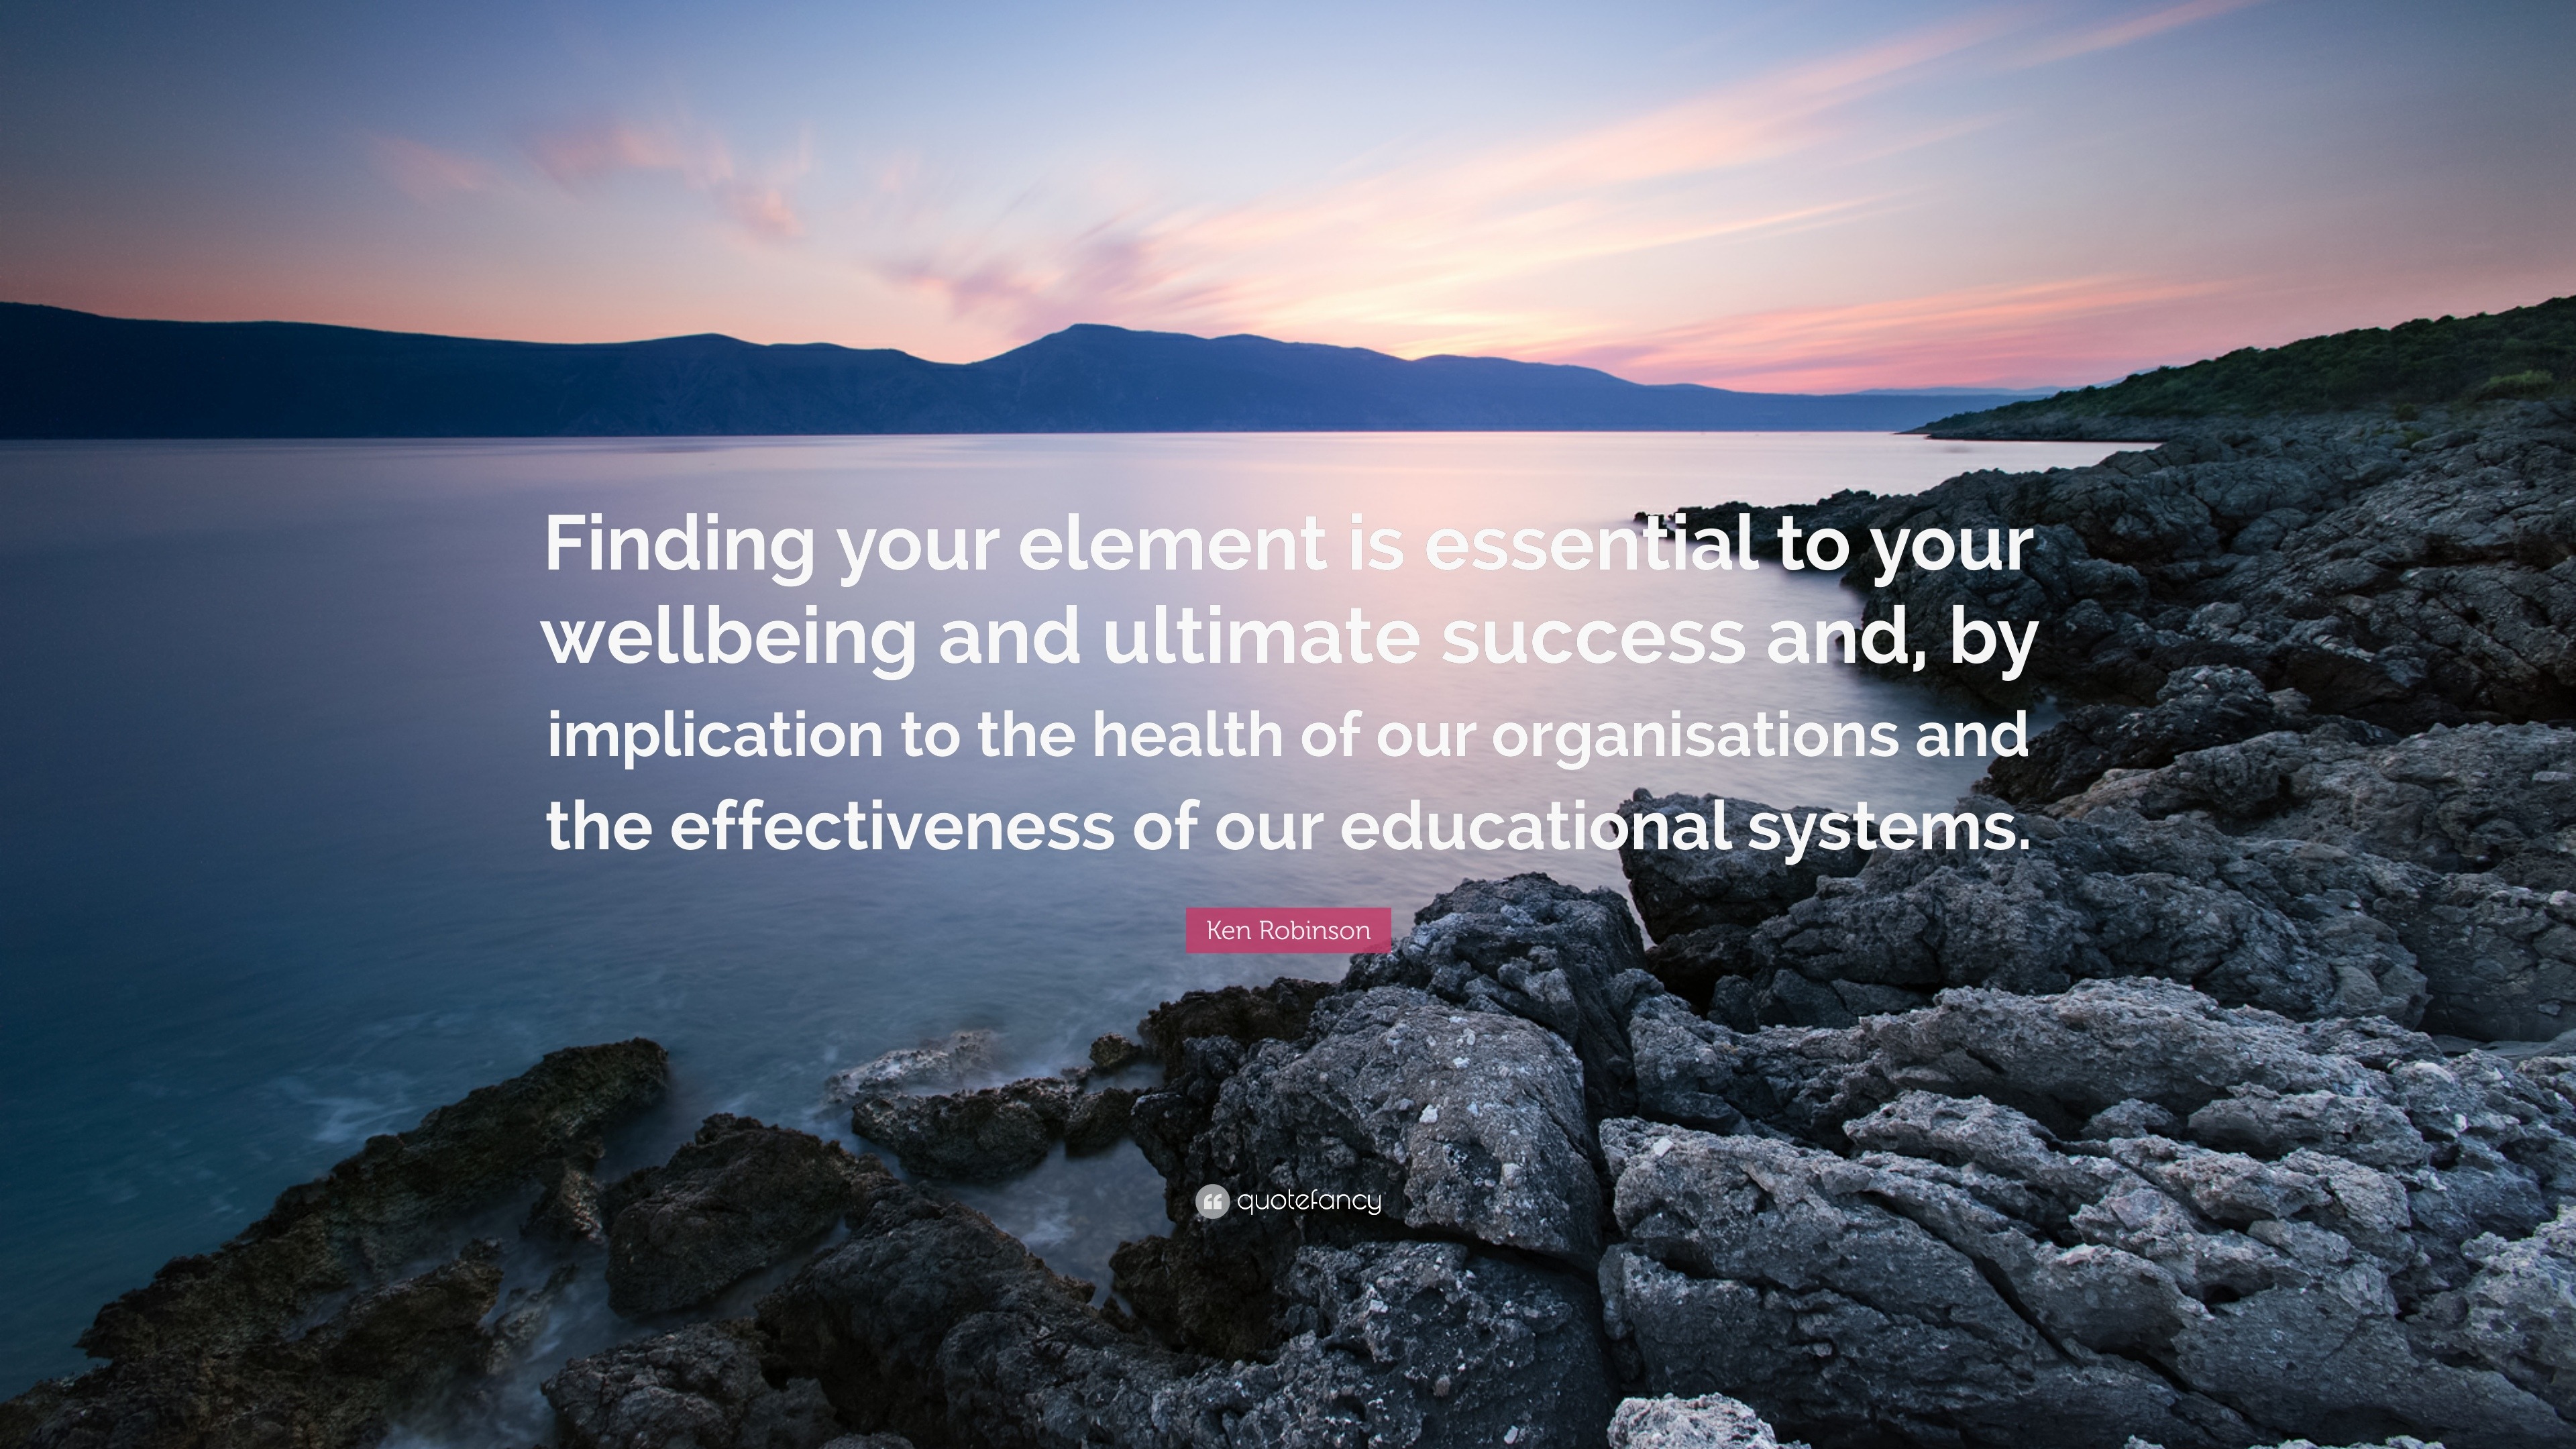 Ken Robinson Quote: “Finding your element is essential to your wellbeing  and ultimate success and, by implication to the health of our organi...”